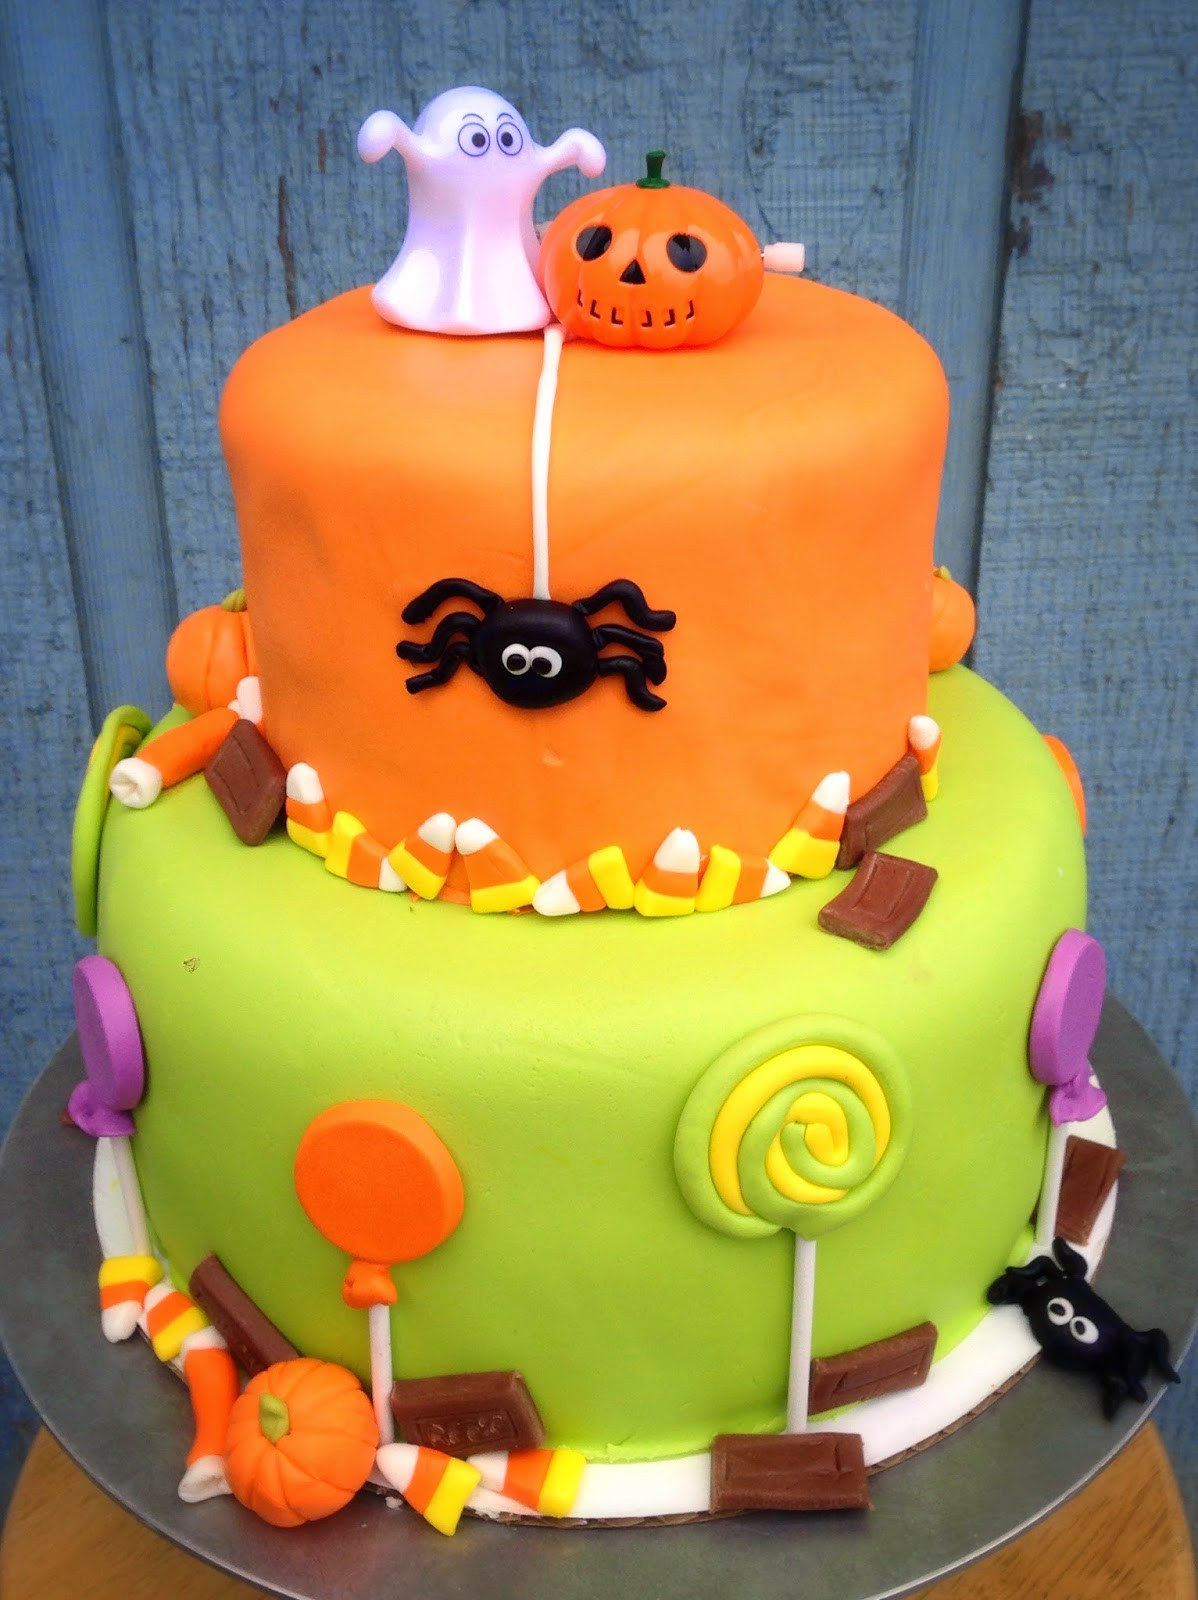 Halloween Birthday Cake Pictures
 Cakes and Cookies Twins Halloween Birthday cake